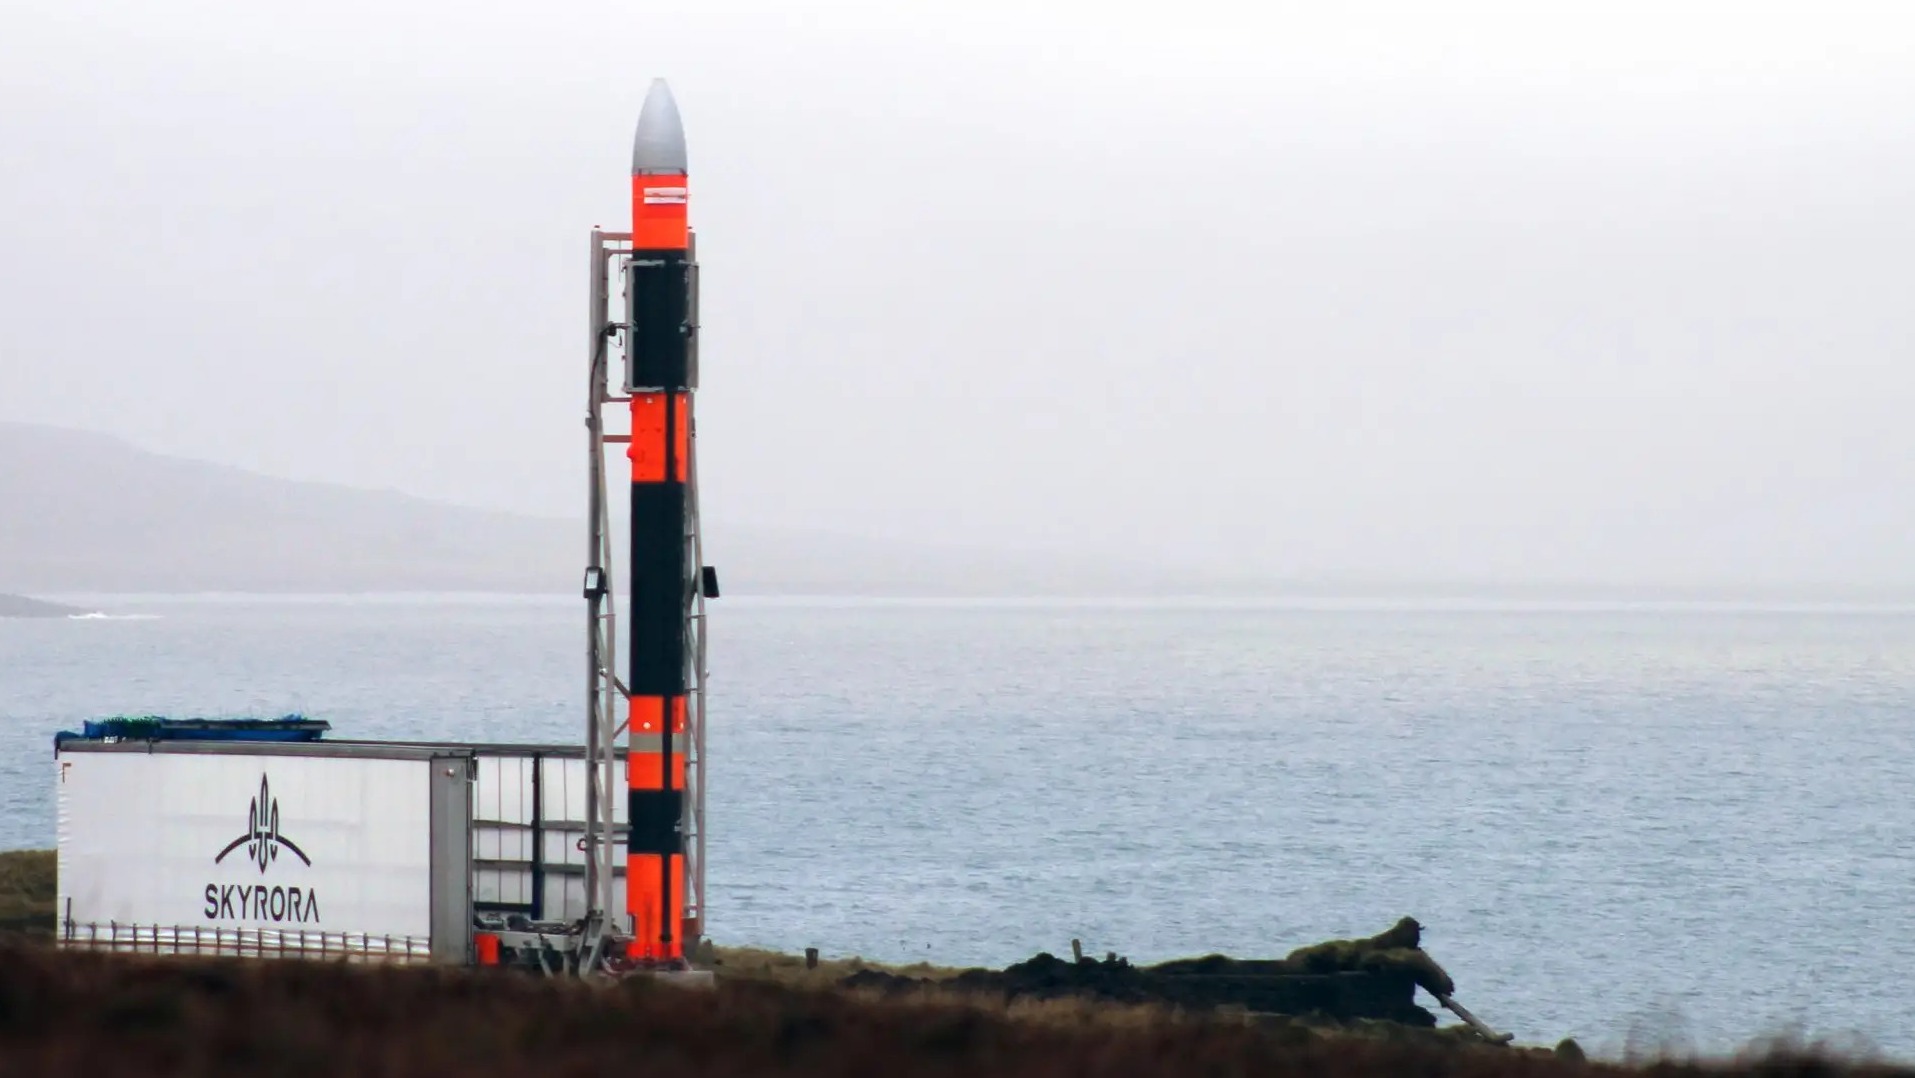 Skyrora's Skylark L suborbital rocket failed to reach space during its first test launch in October 2022.